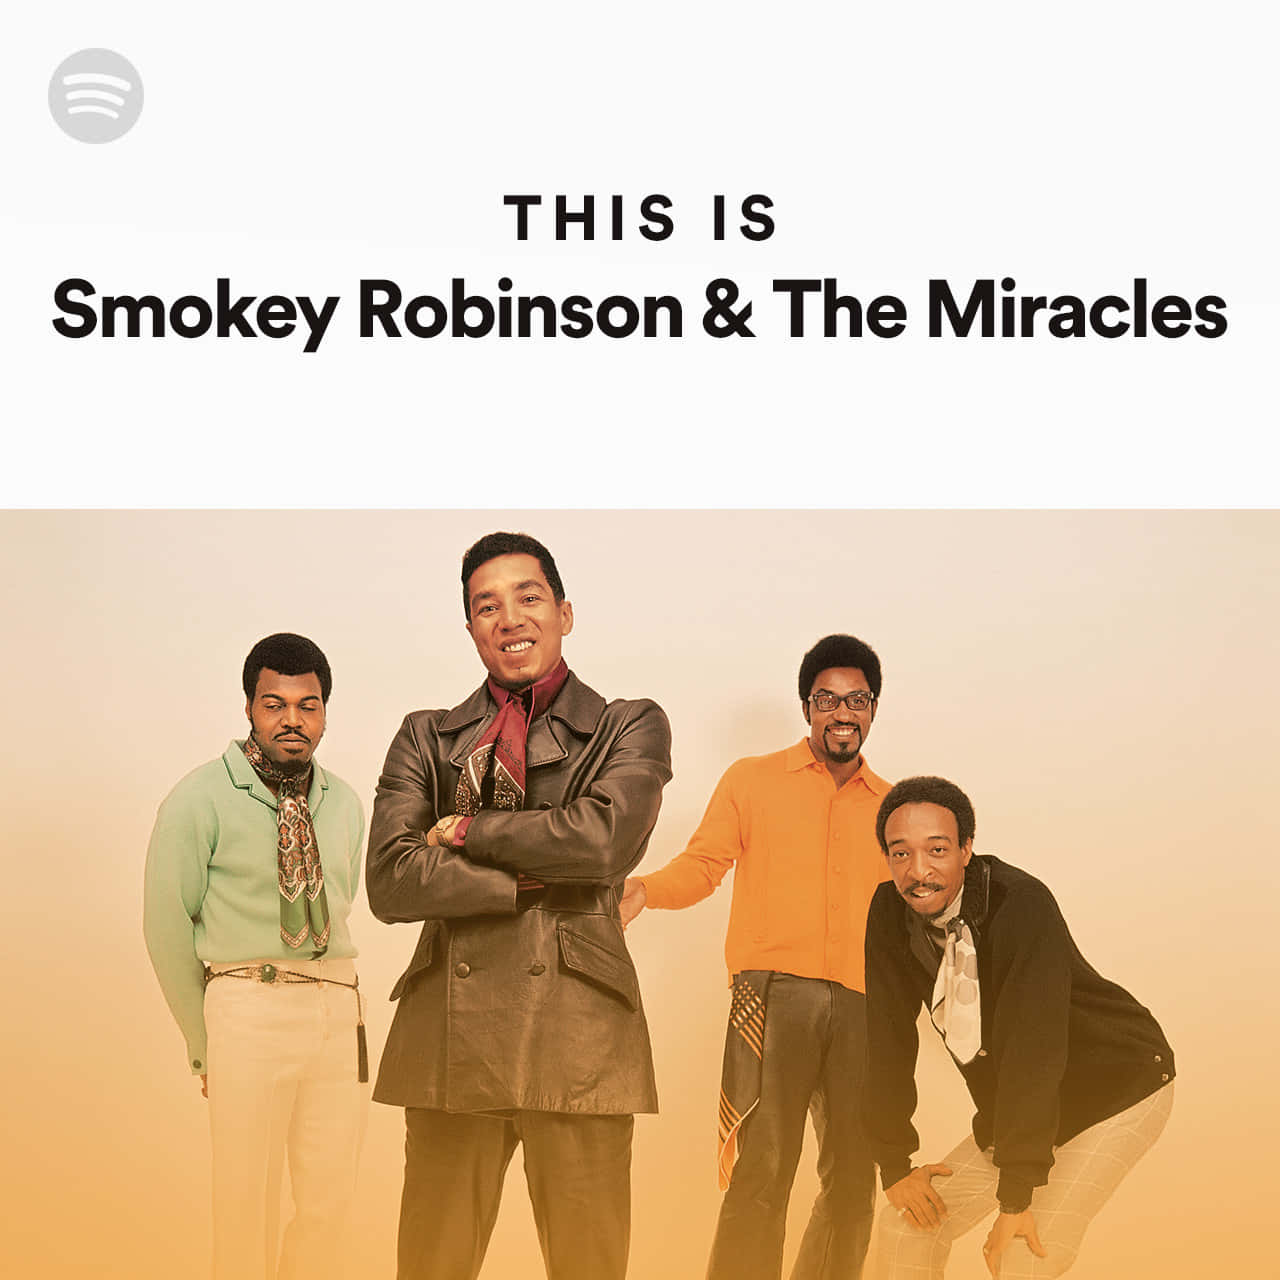 Smokeyrobinson Und Die Miracles Spotify-cover. Wallpaper